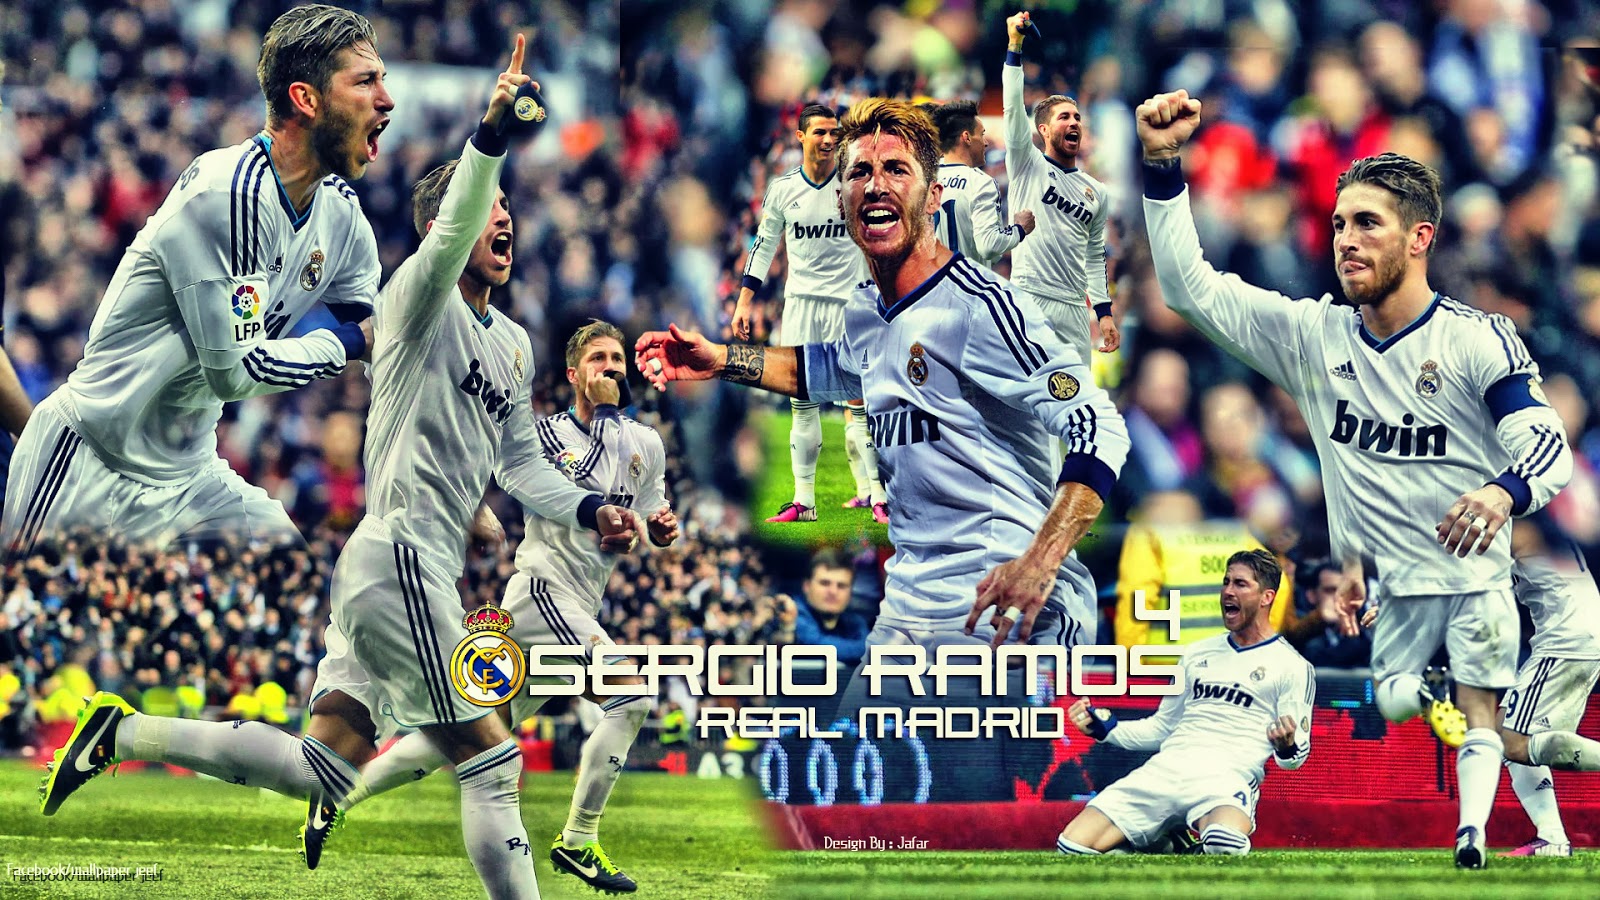 Sergio Ramos Real Madrid Fc HD Wallpaper Car Pictures